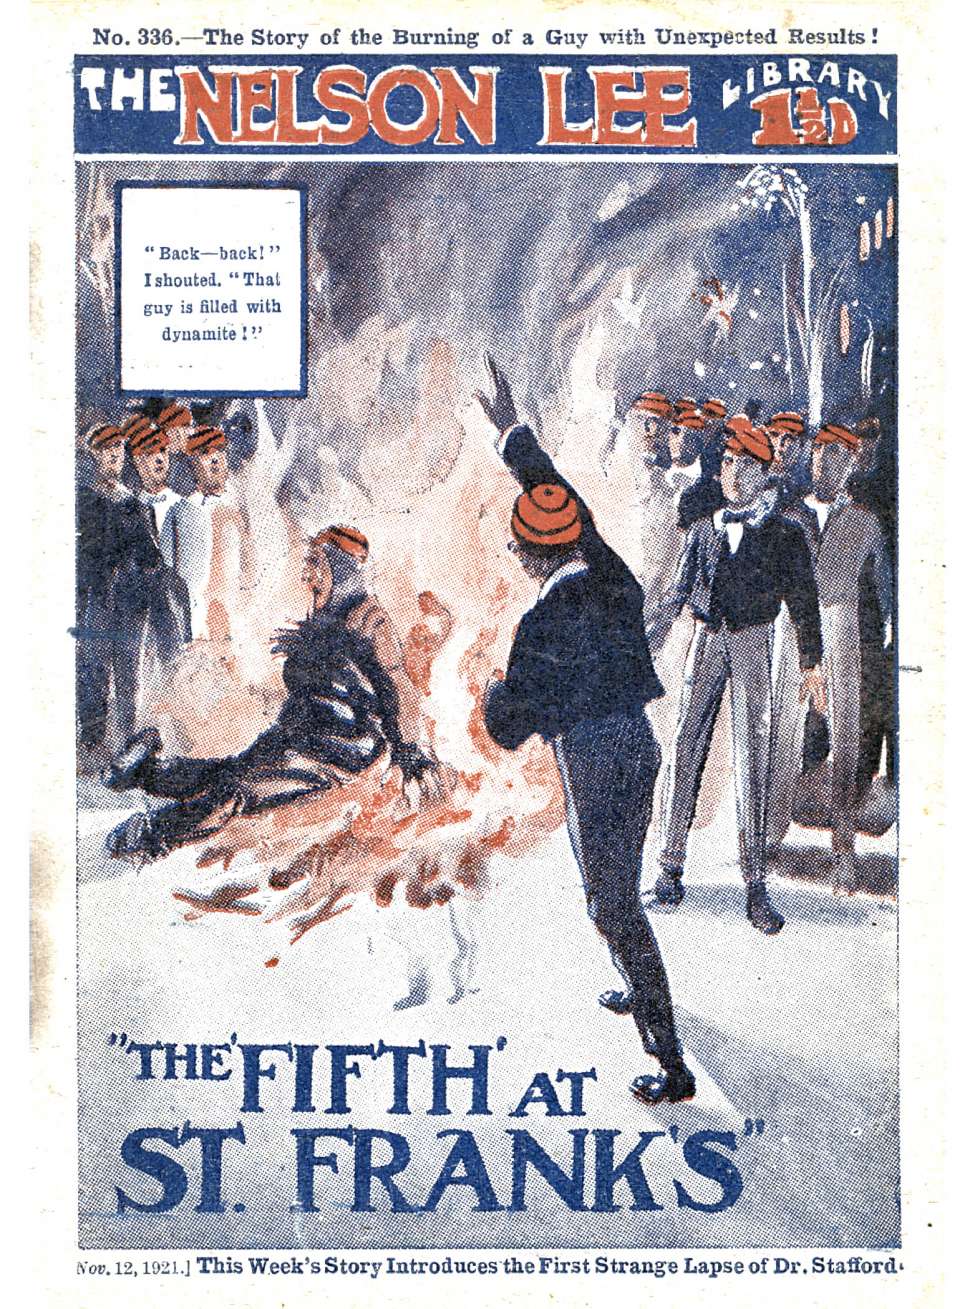 Comic Book Cover For Nelson Lee Library s1 336 - The Fifth at St. Frank's